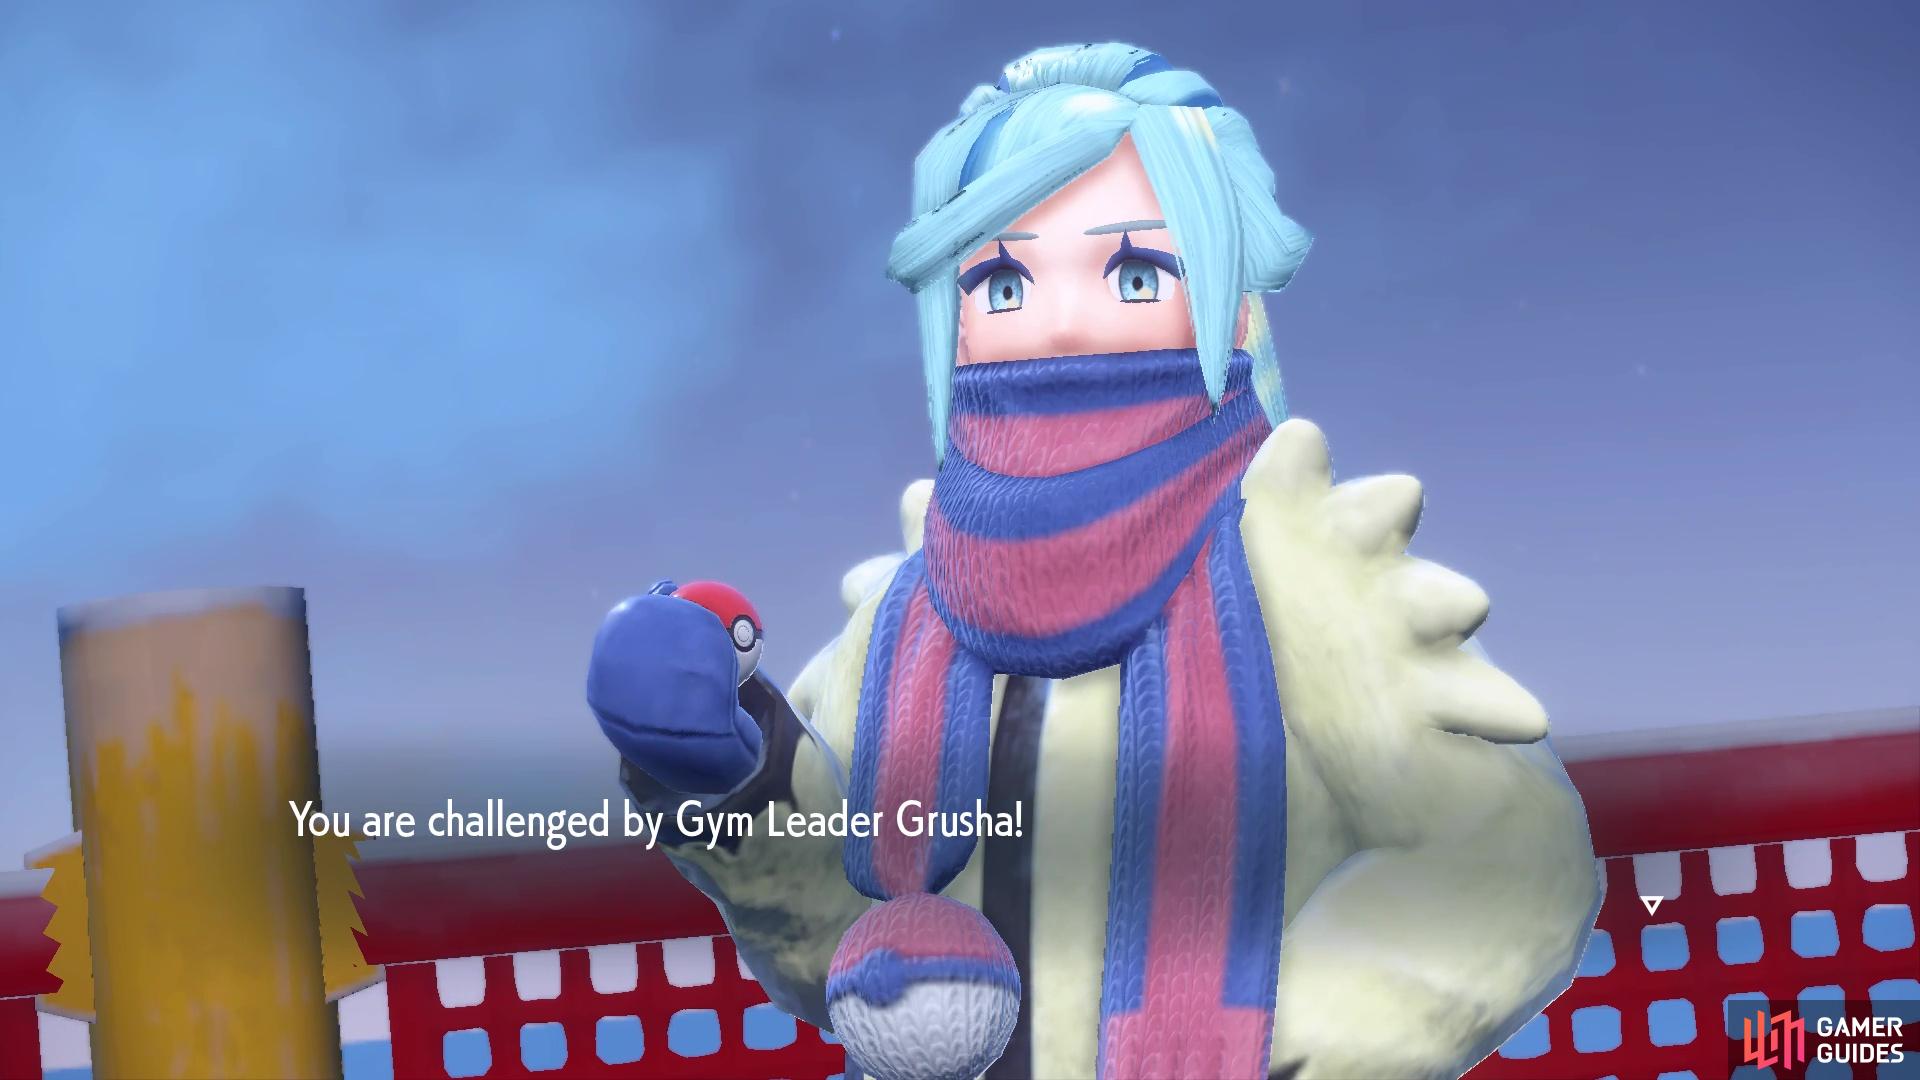 Grusha is the Ice Gym Leader found at Glaceado Gym.